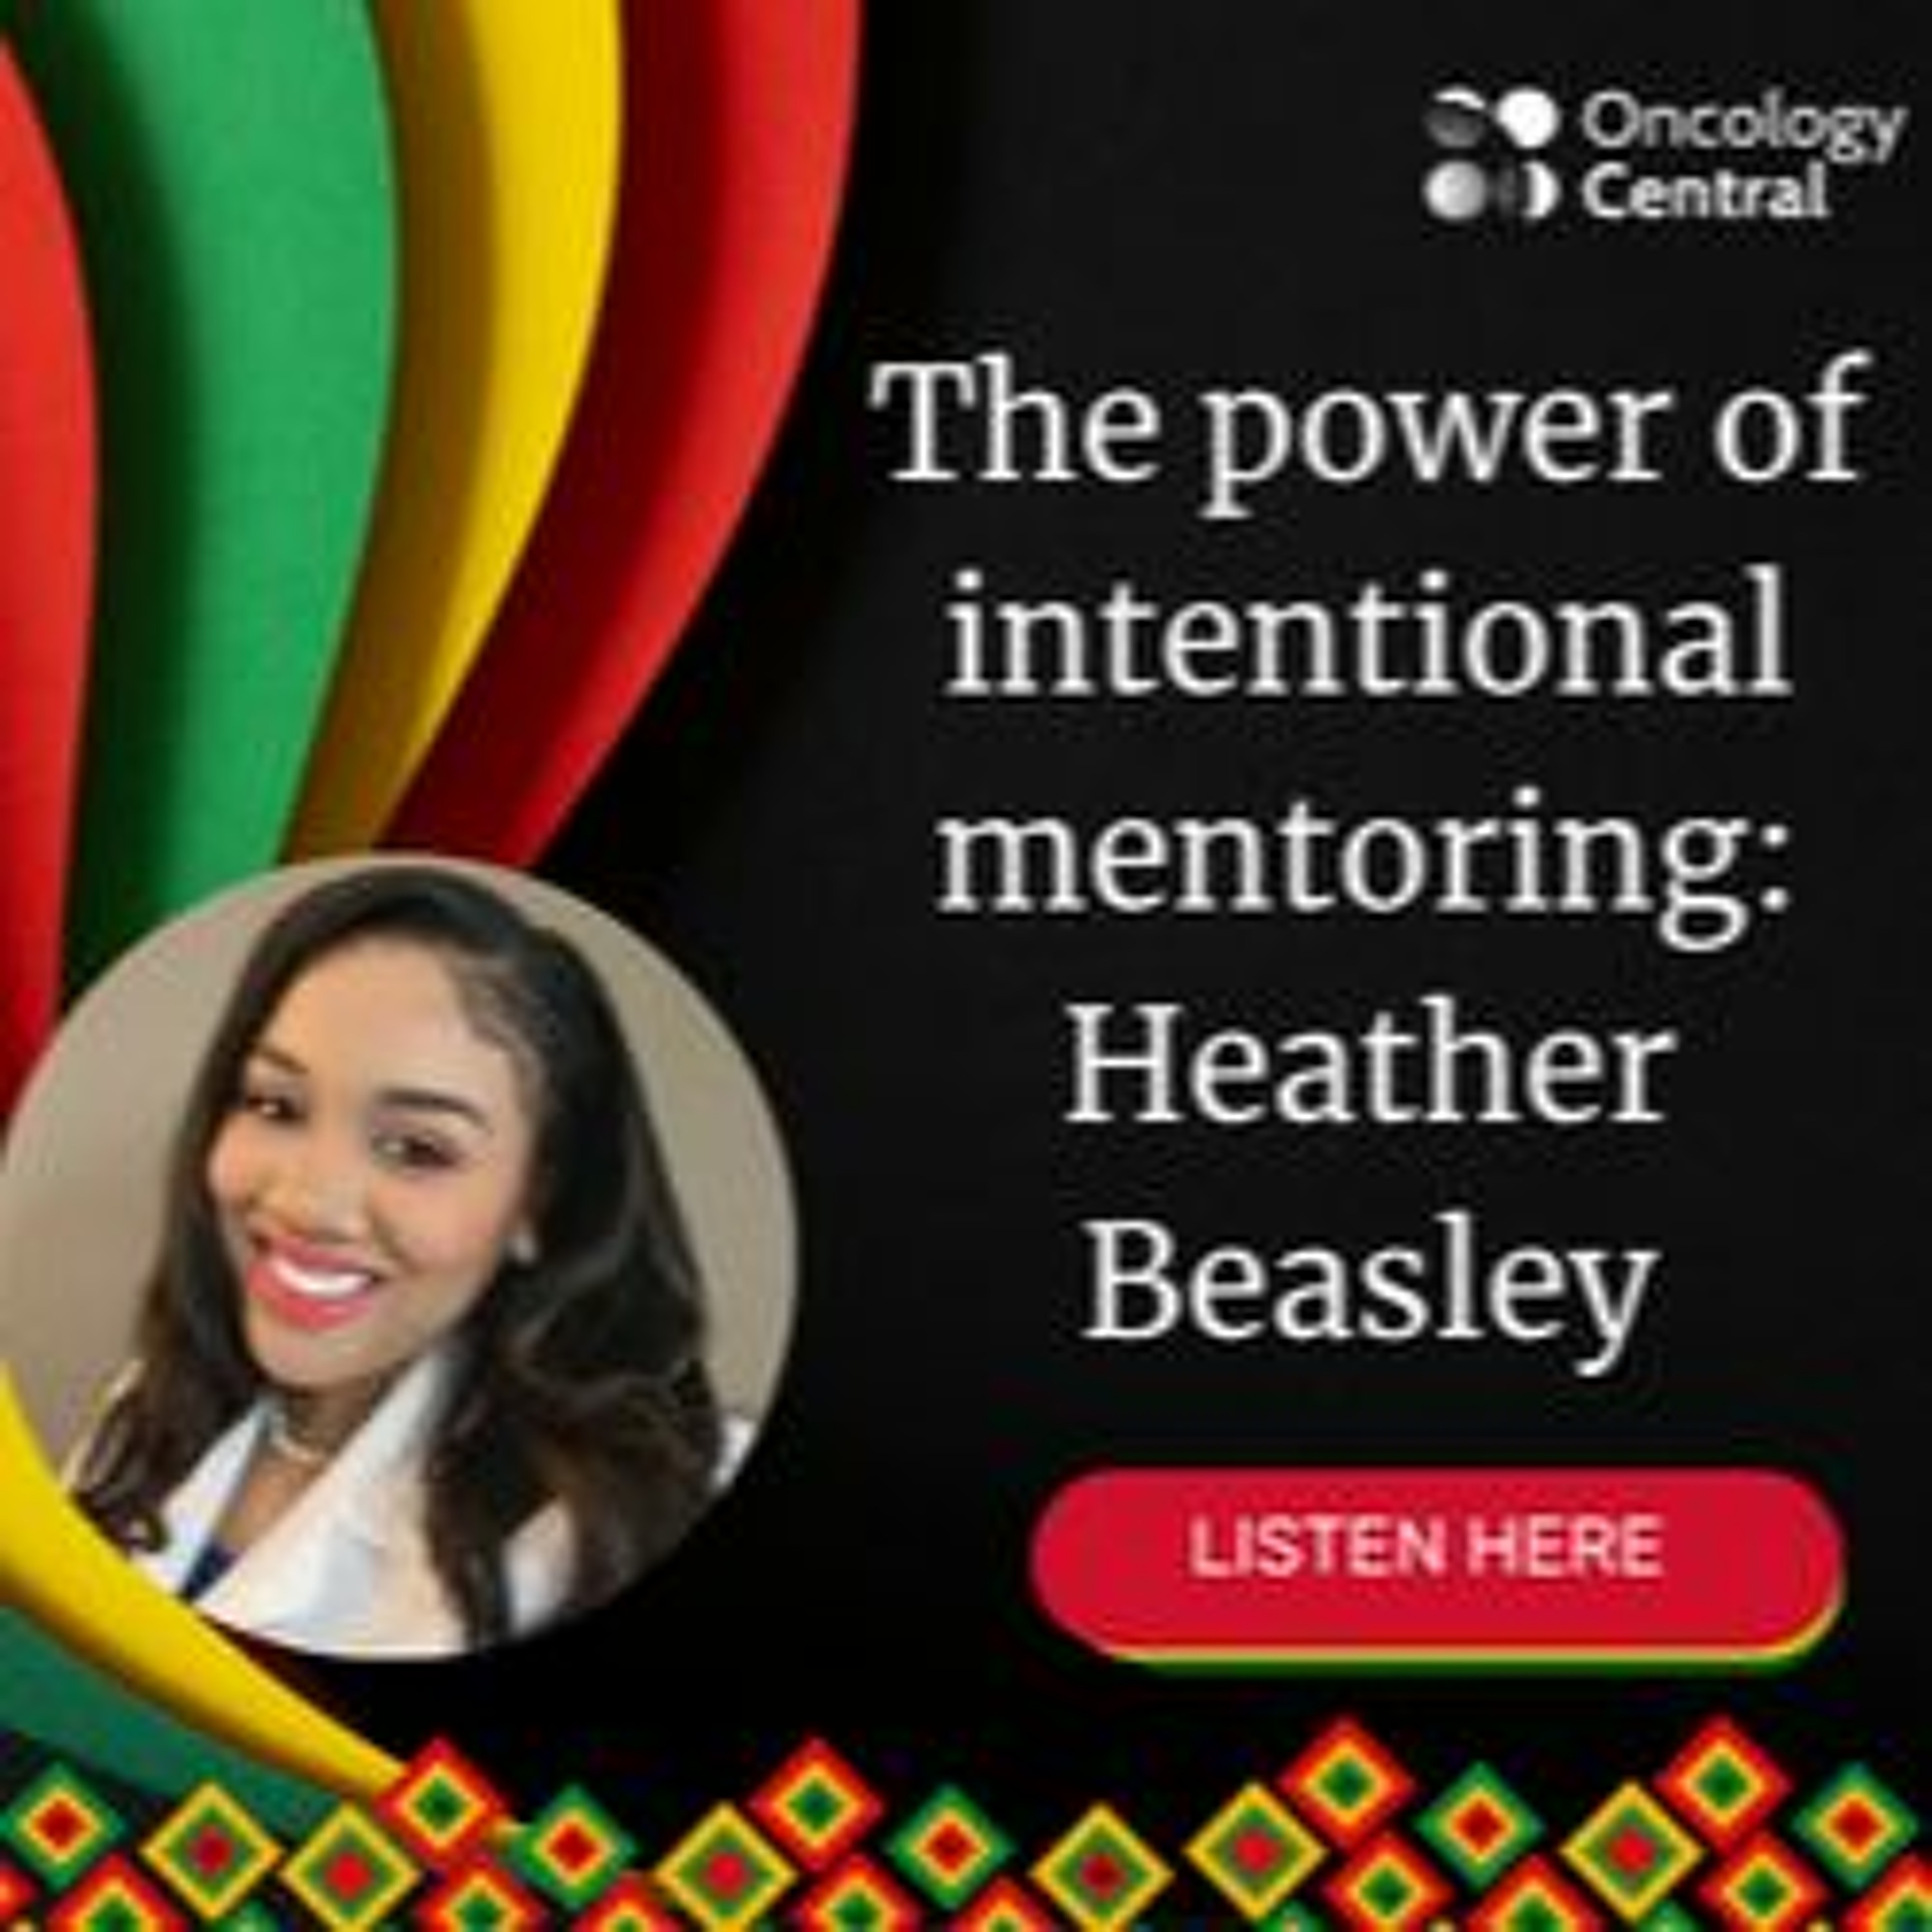 The power of intentional mentoring: an interview with Heather Beasley